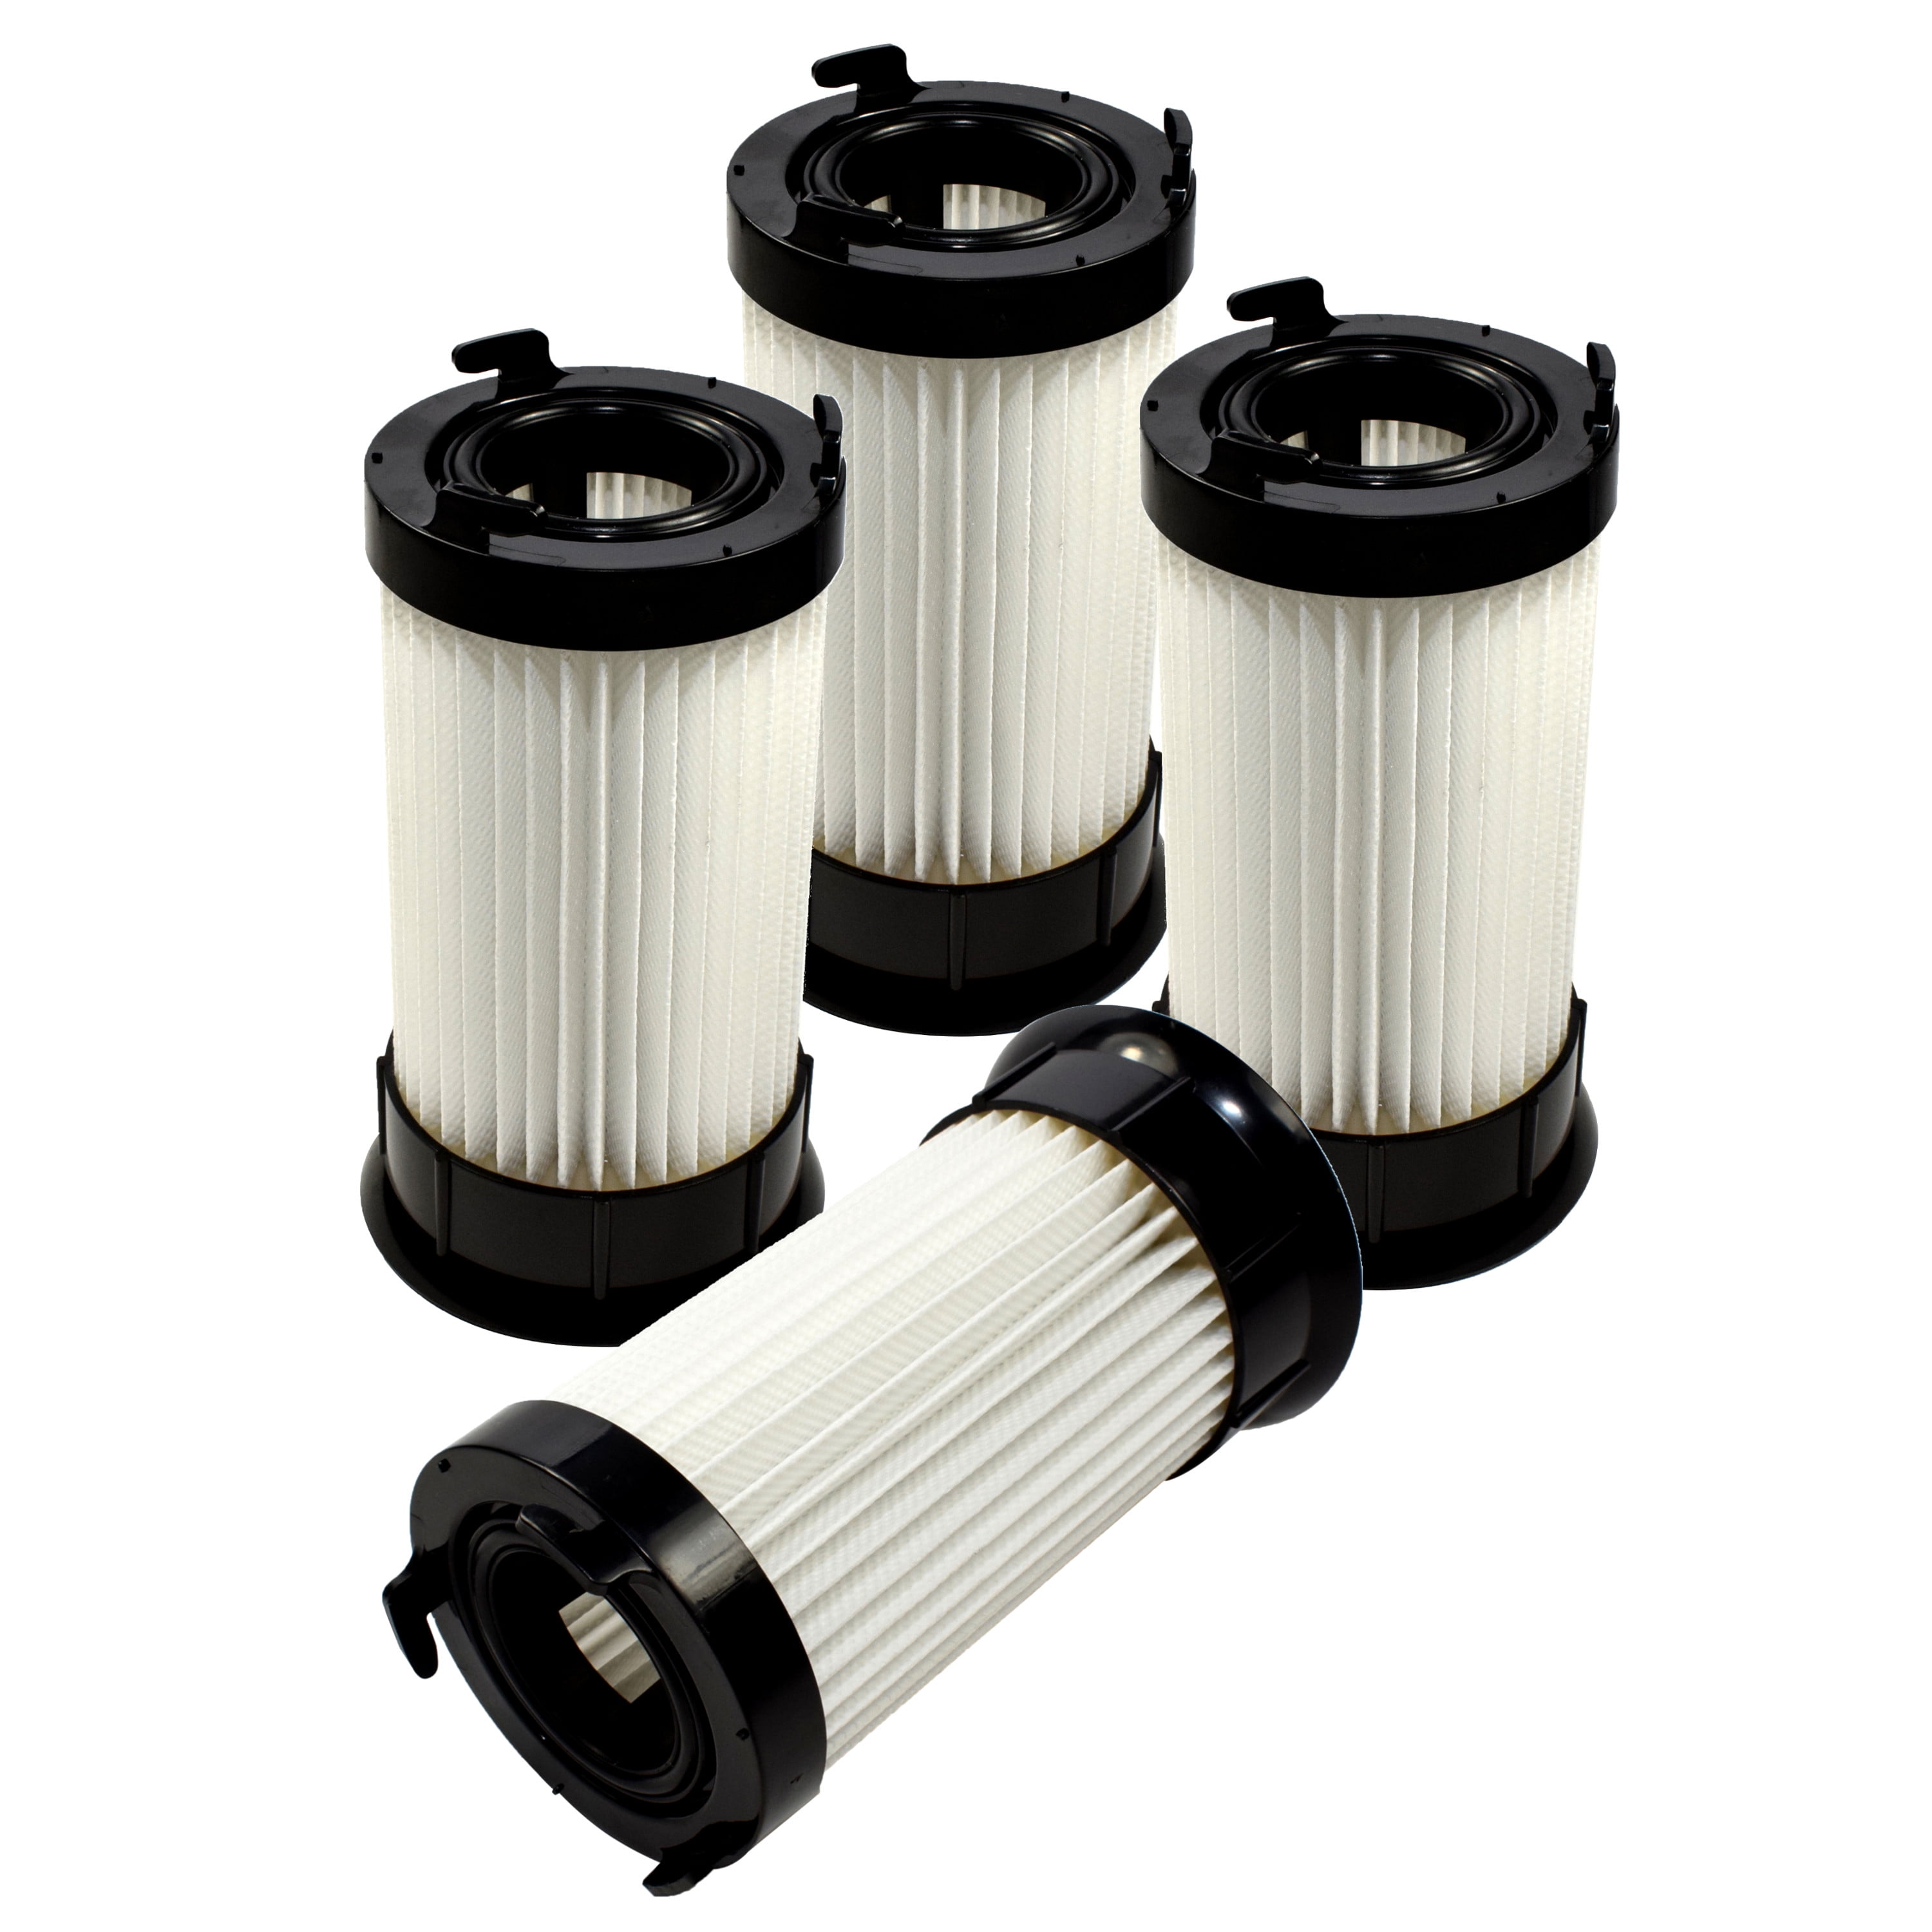 5550 Series 2 Eureka DCF-4 & 18 Washable Dust Cup Filter 63073C for Eureka 4700 